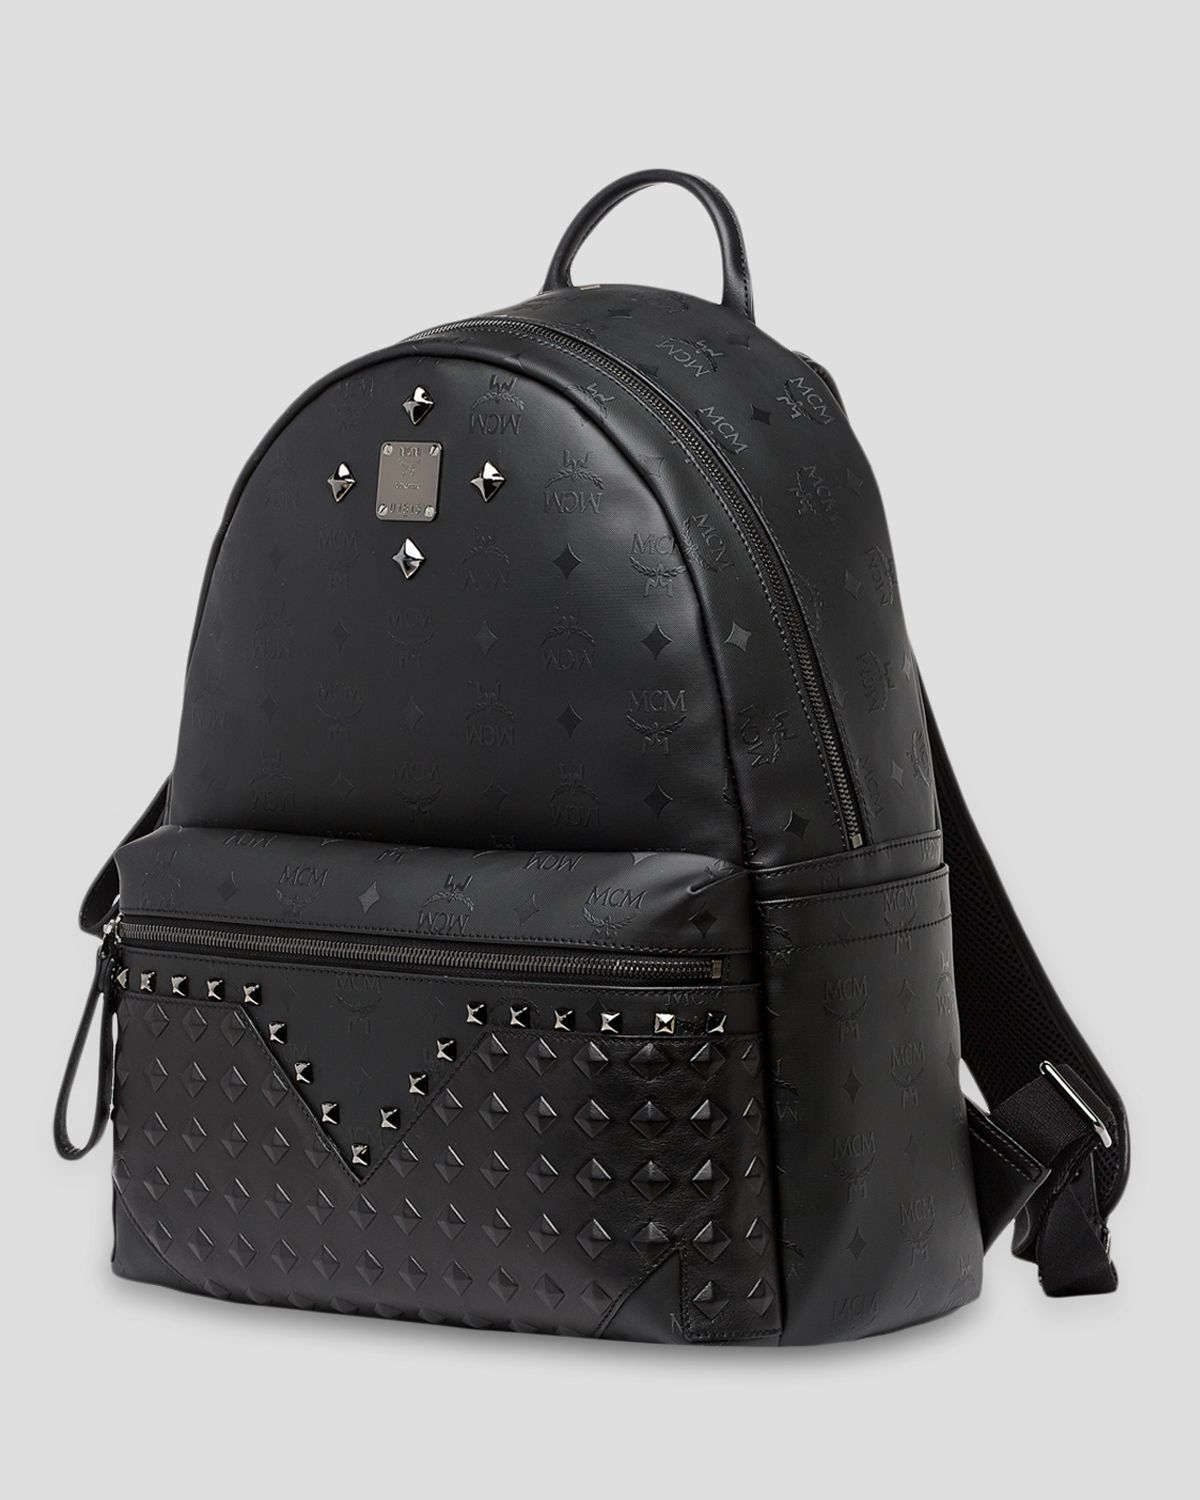 Black Mcm Backpack With Studs | IUCN Water